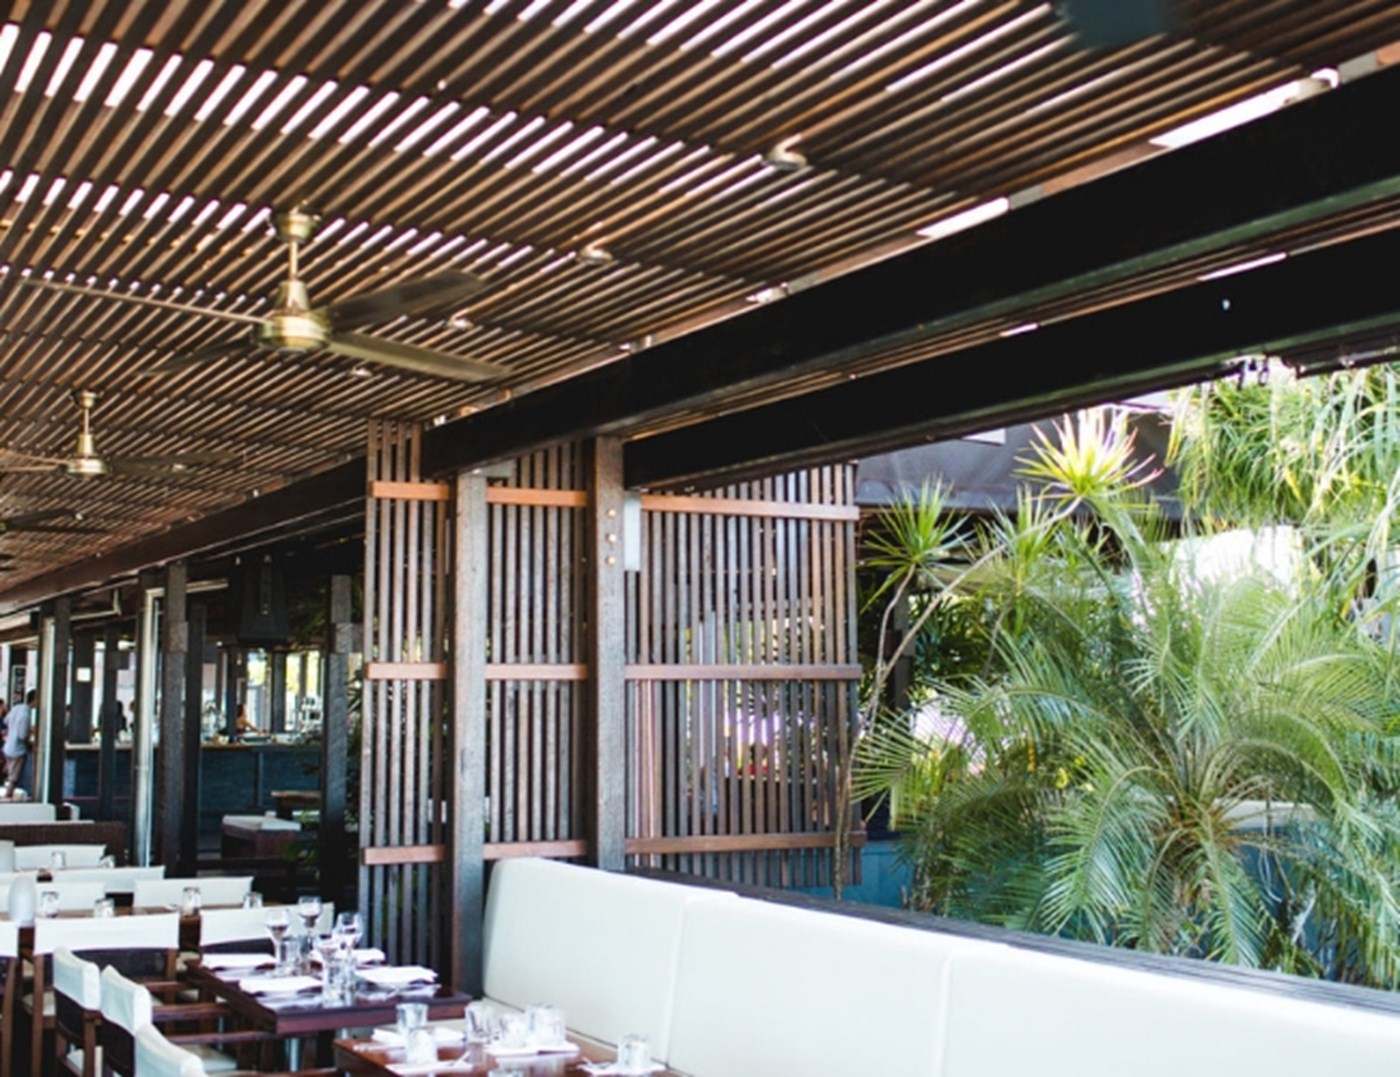 Exterior dining area with wooden slat style walls and ceiling